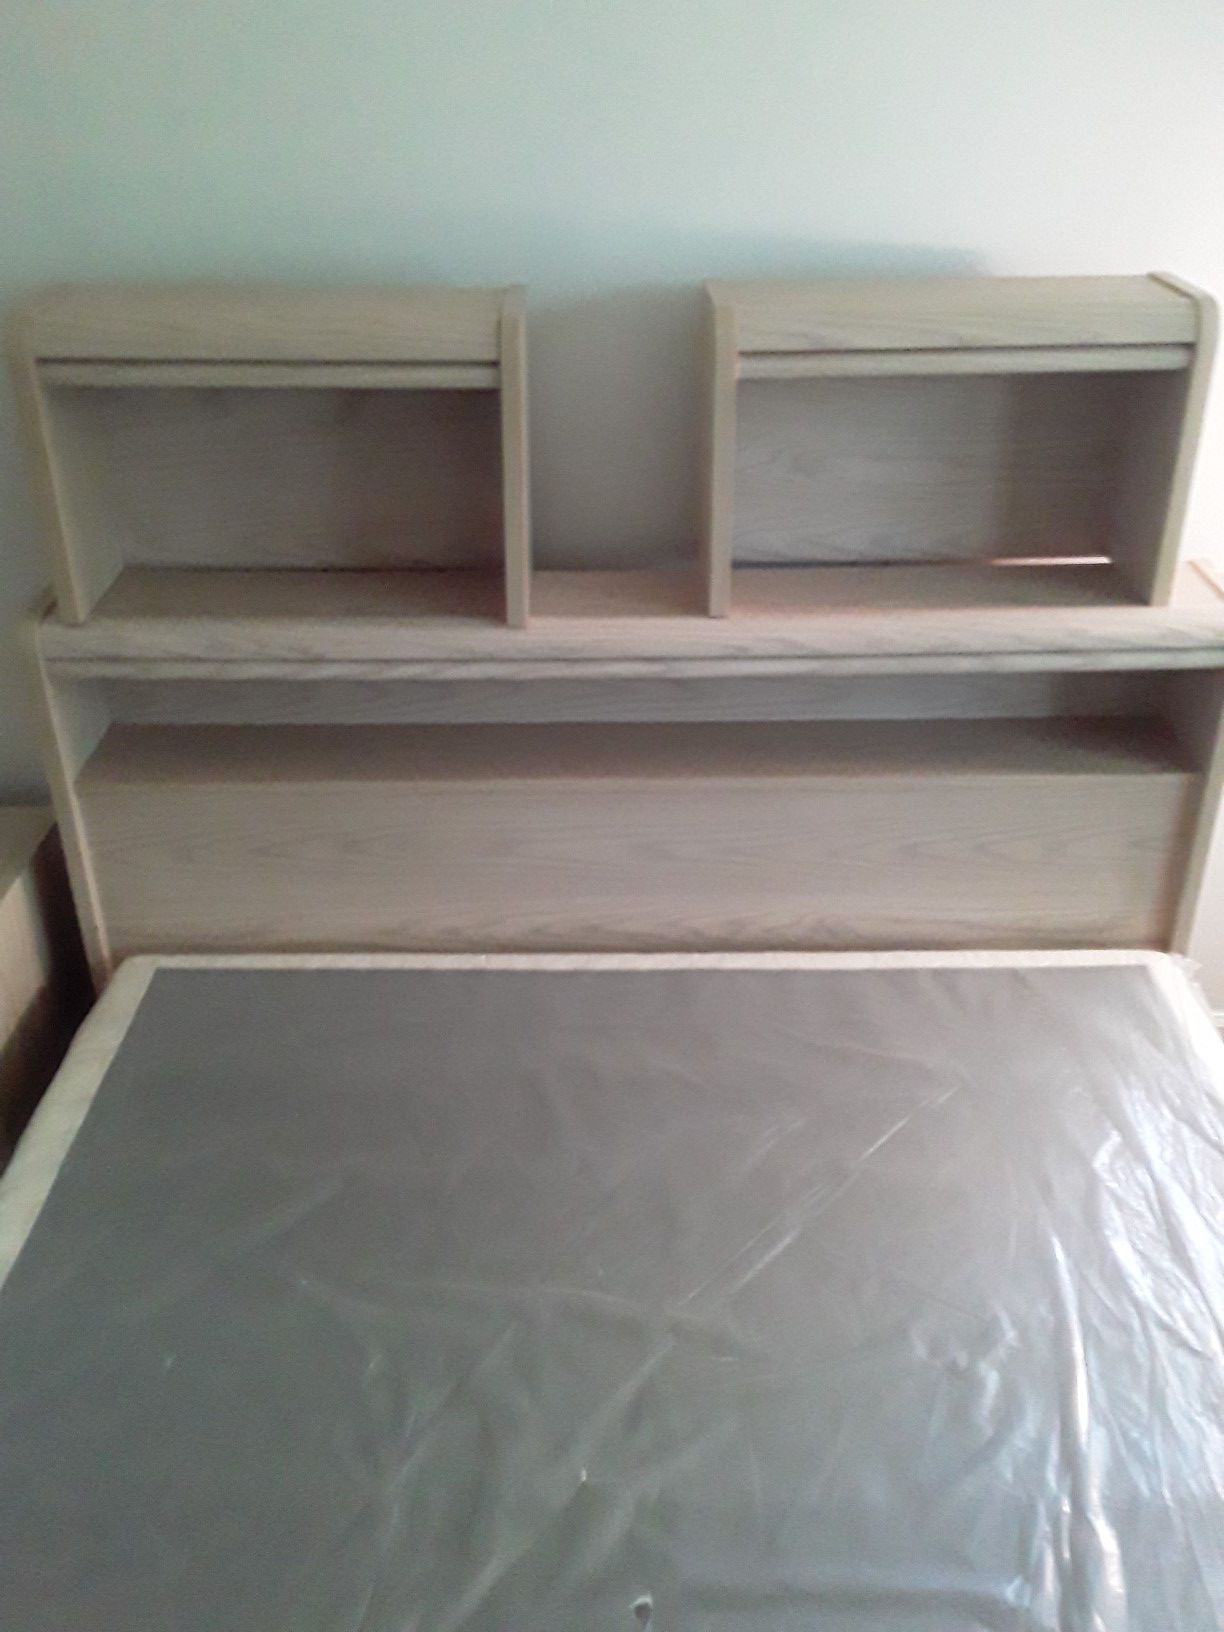 FULL SIZE BED BOX & 2 NIGHT STANDS